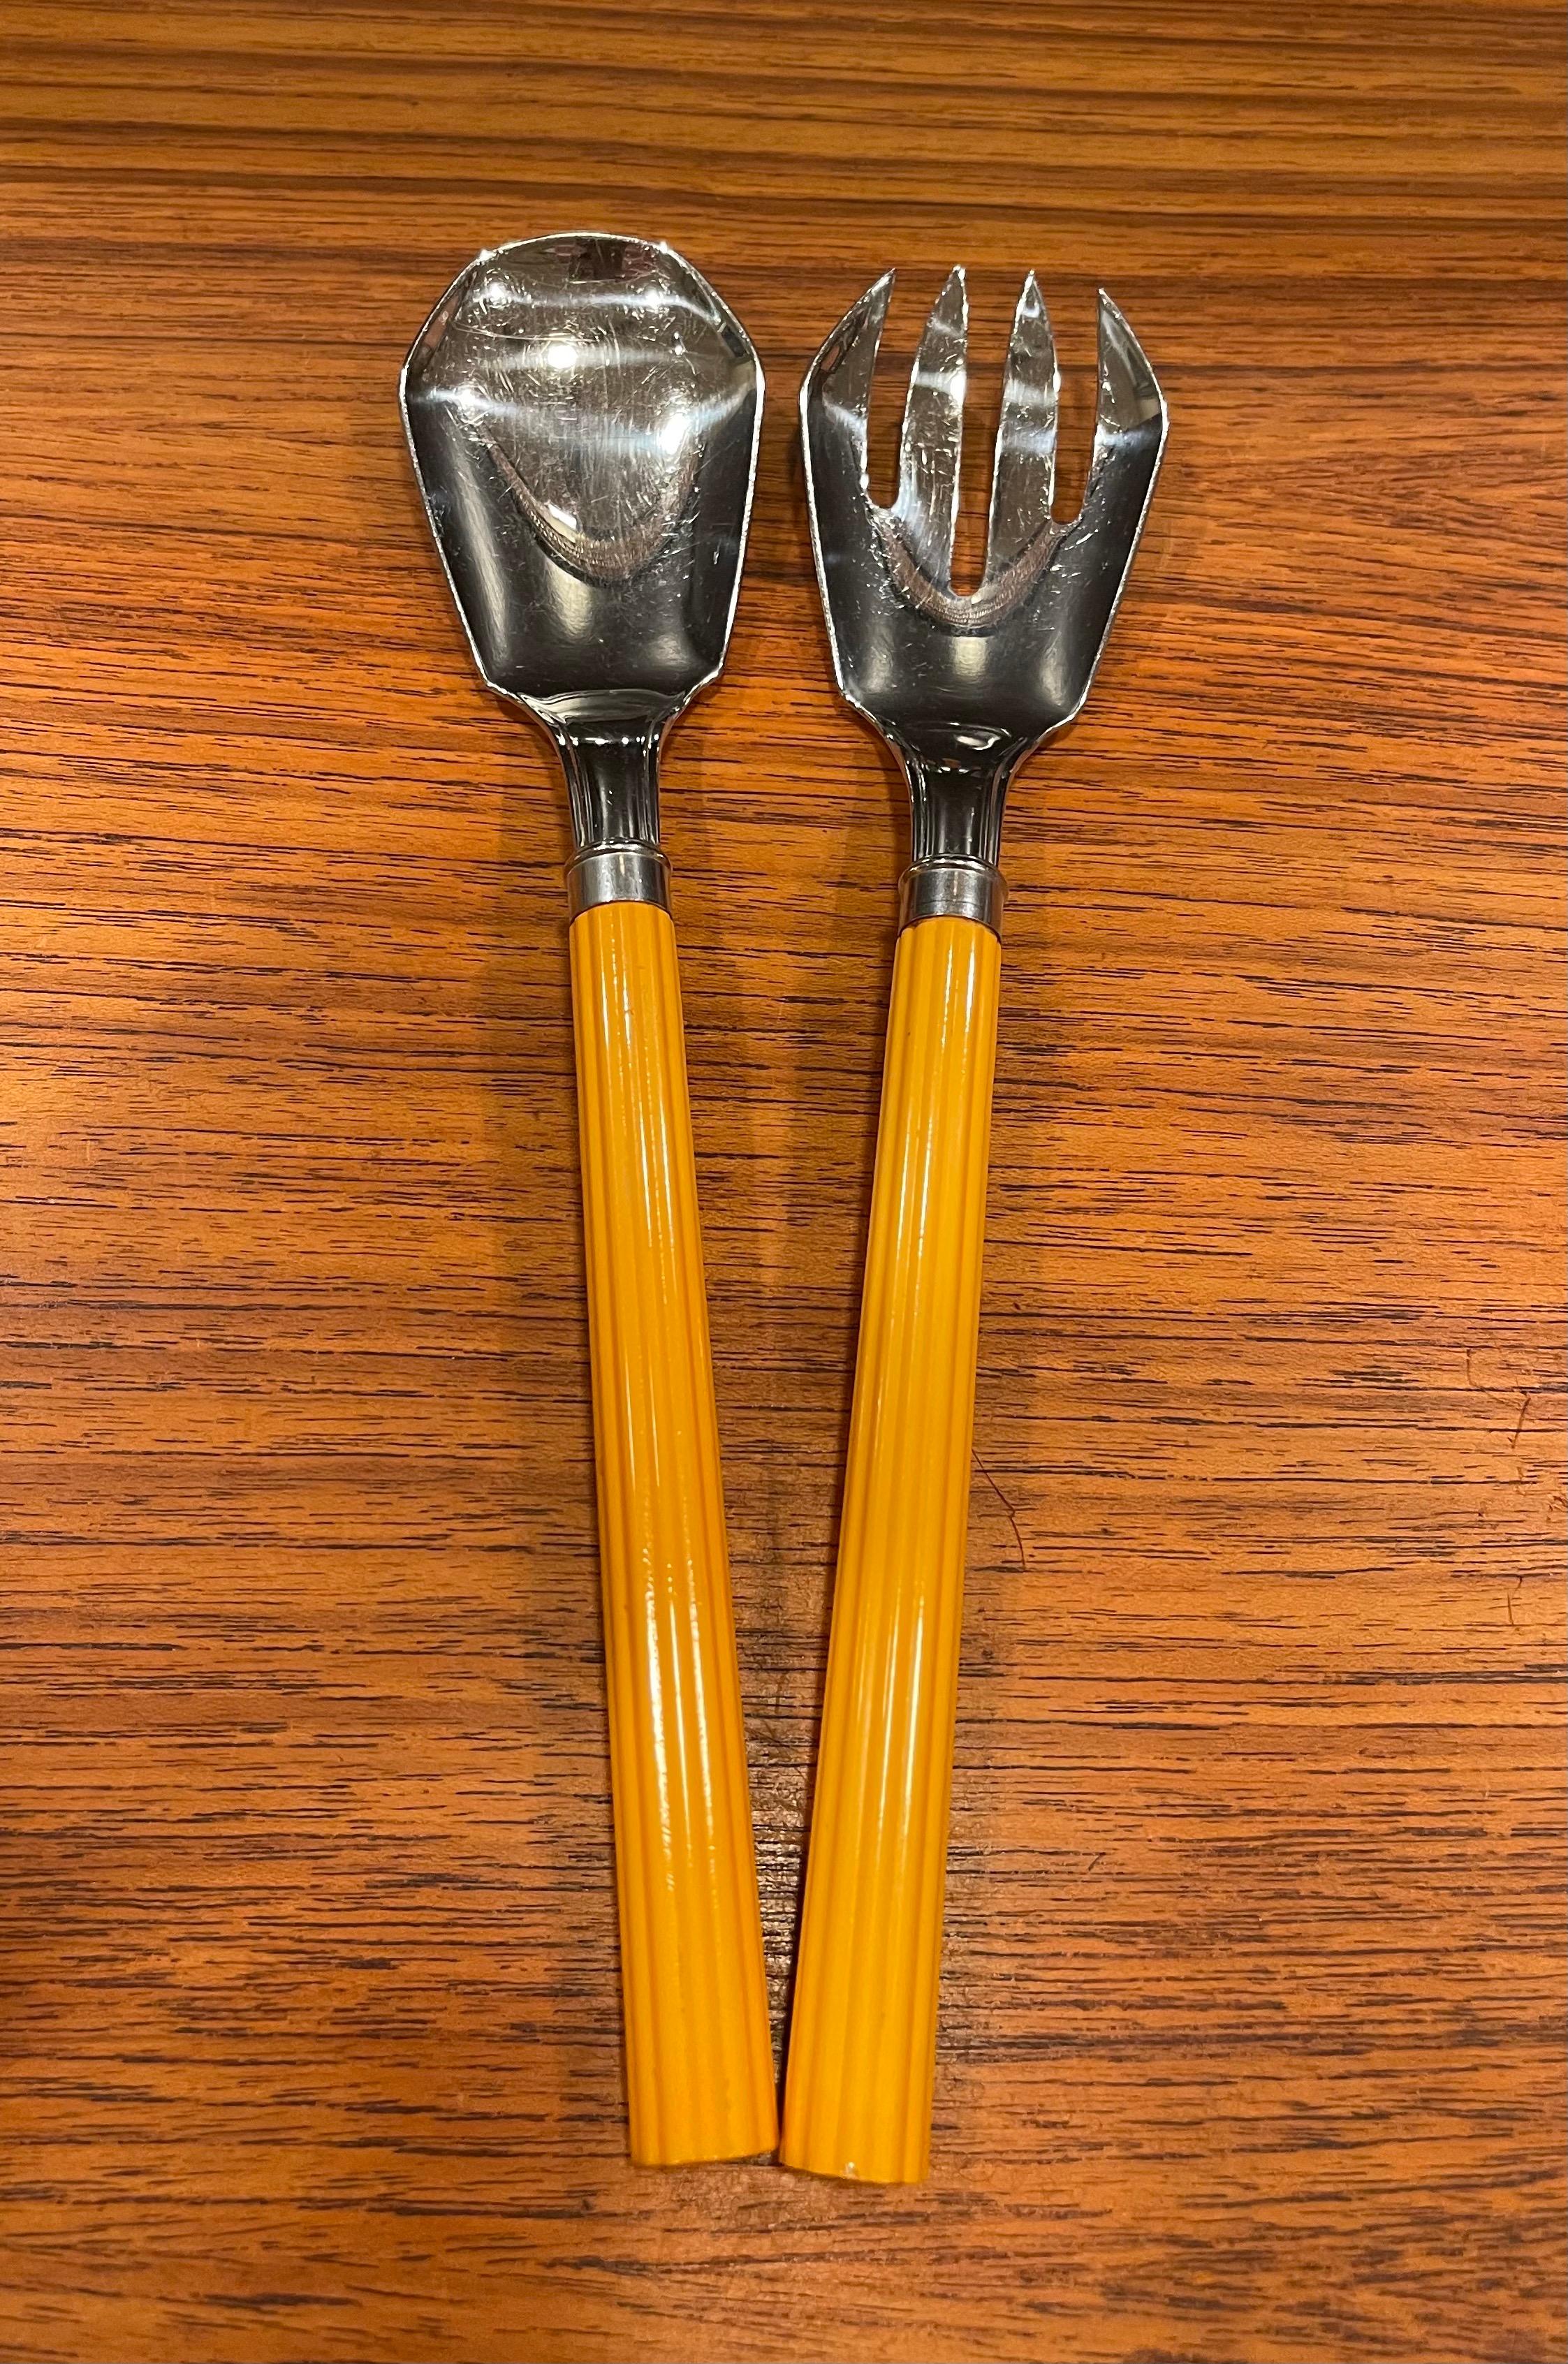 American Bakelite & Stainless Steel Art Deco Salad Servers by Chase & Co.